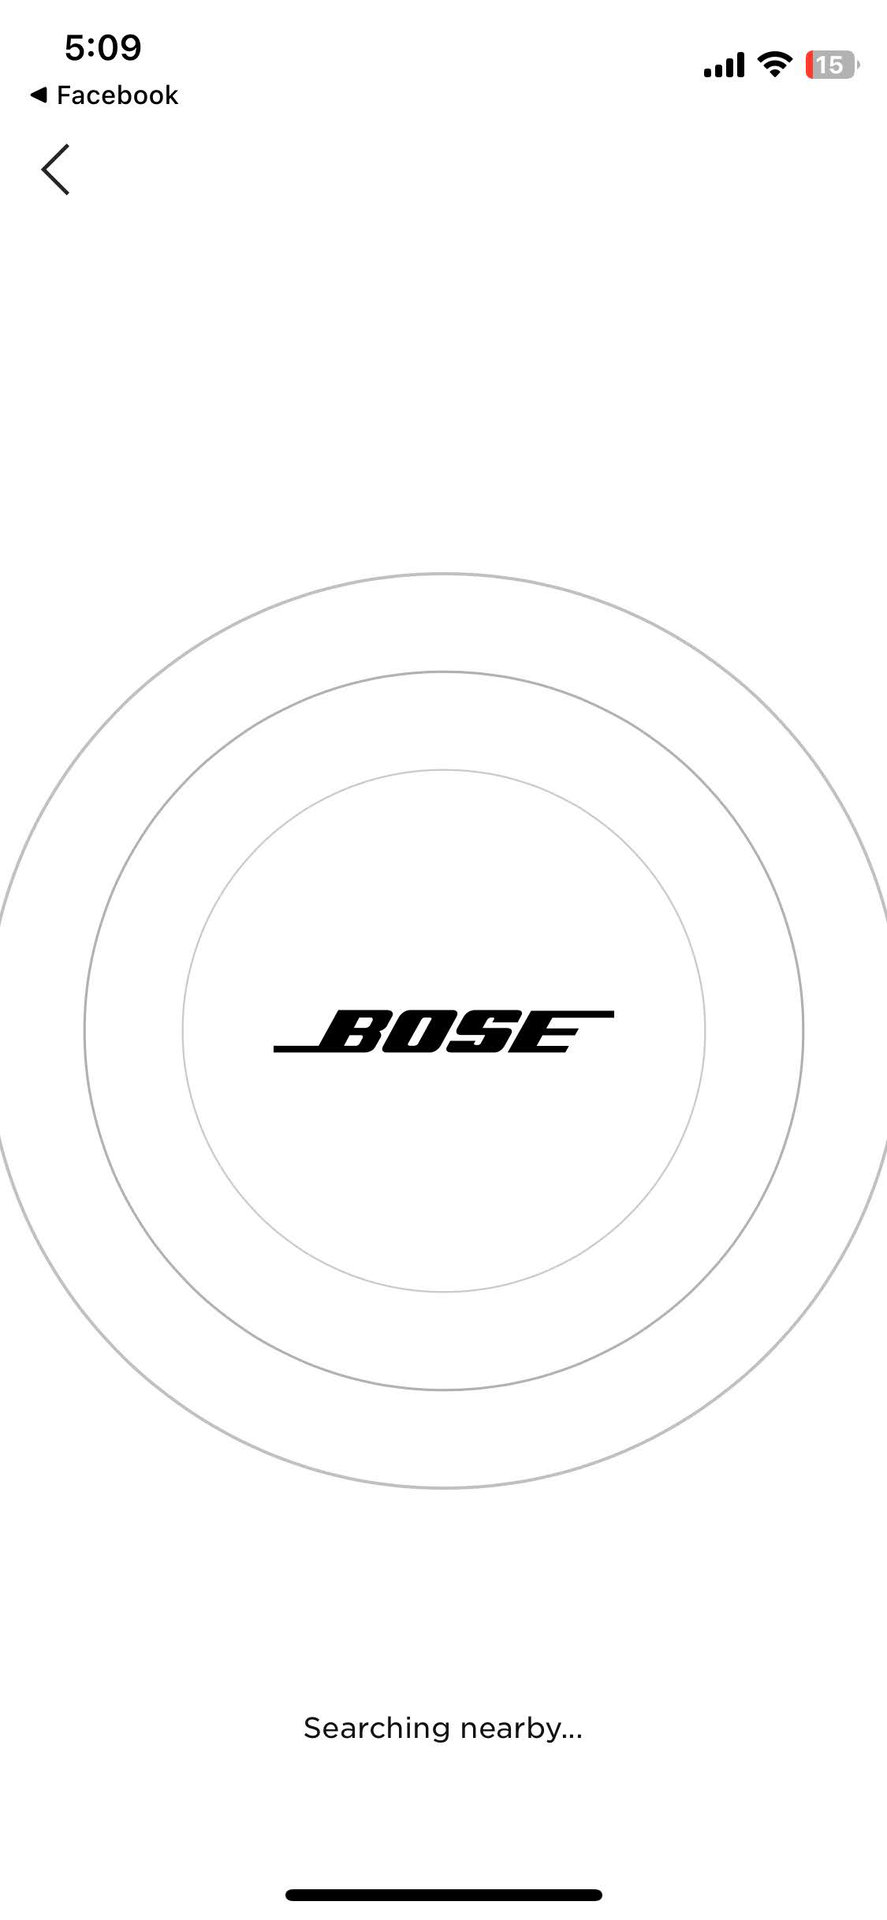 How to pair Bose headphones to an iPhone using the Bose Music app (4)